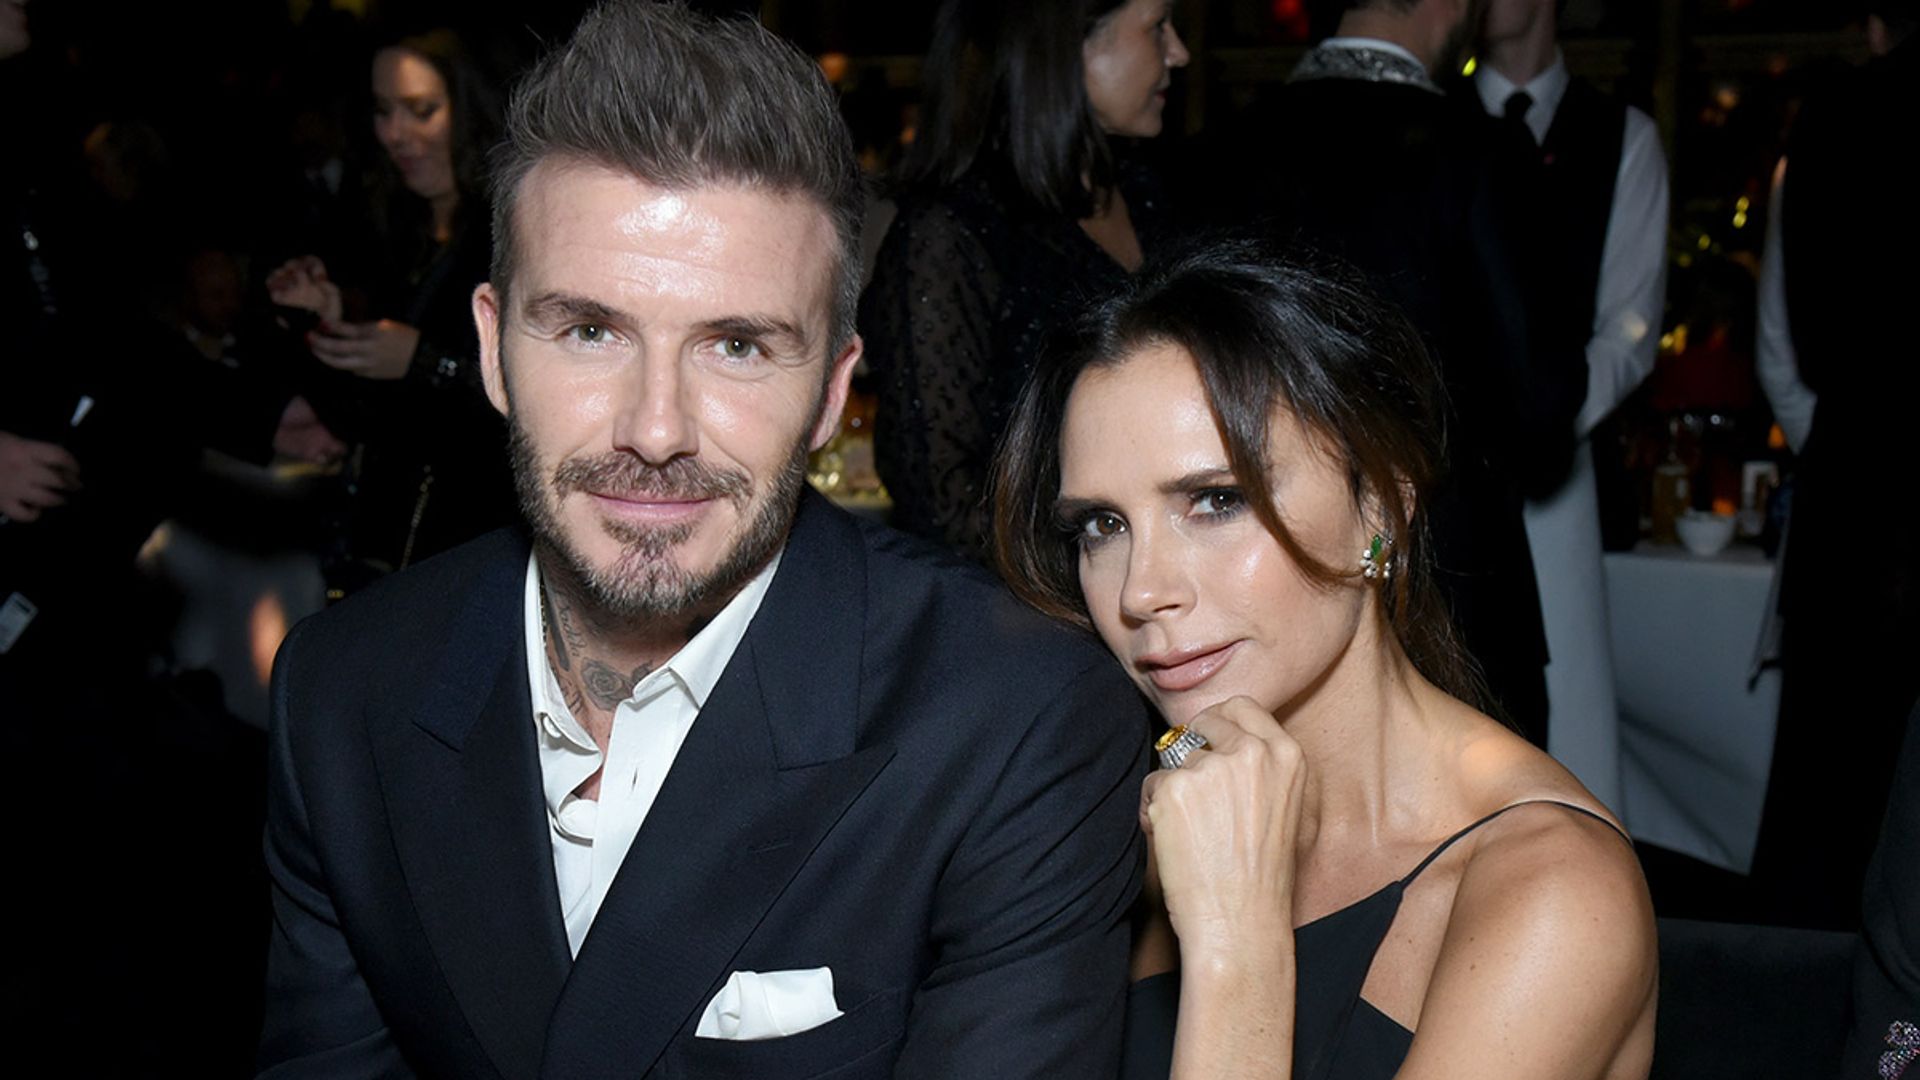 David Beckham goes shirtless on birthday: ‘Not bad for 47,’ Victoria says